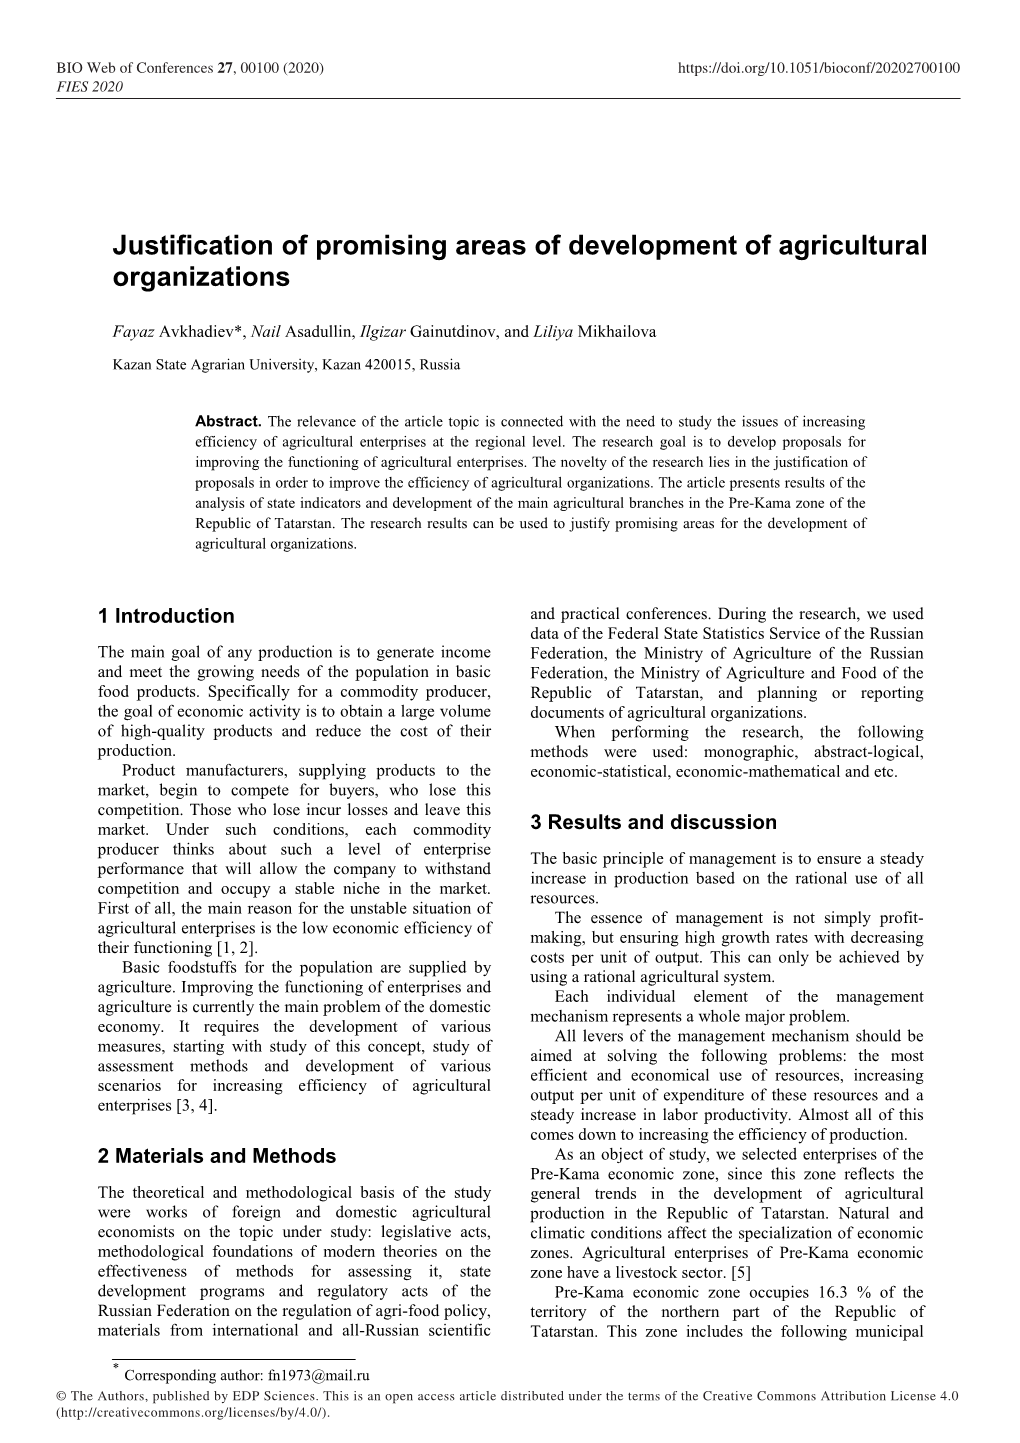 Justification of Promising Areas of Development of Agricultural Organizations